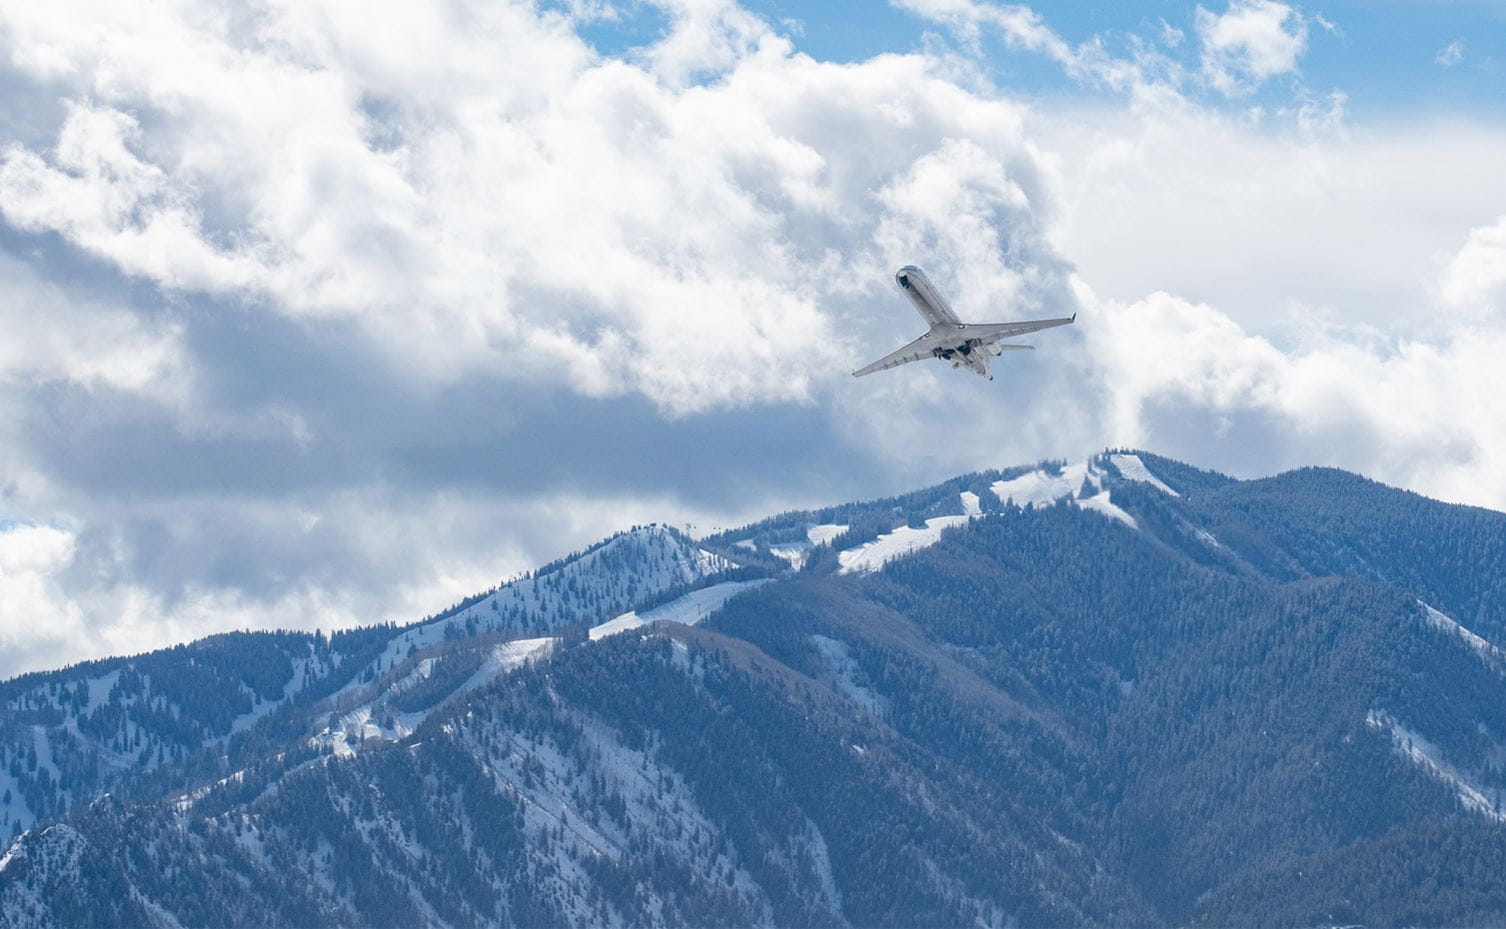 Plane taking off from Aspen-Pitkin County Airport with Aspen Highlands in the background